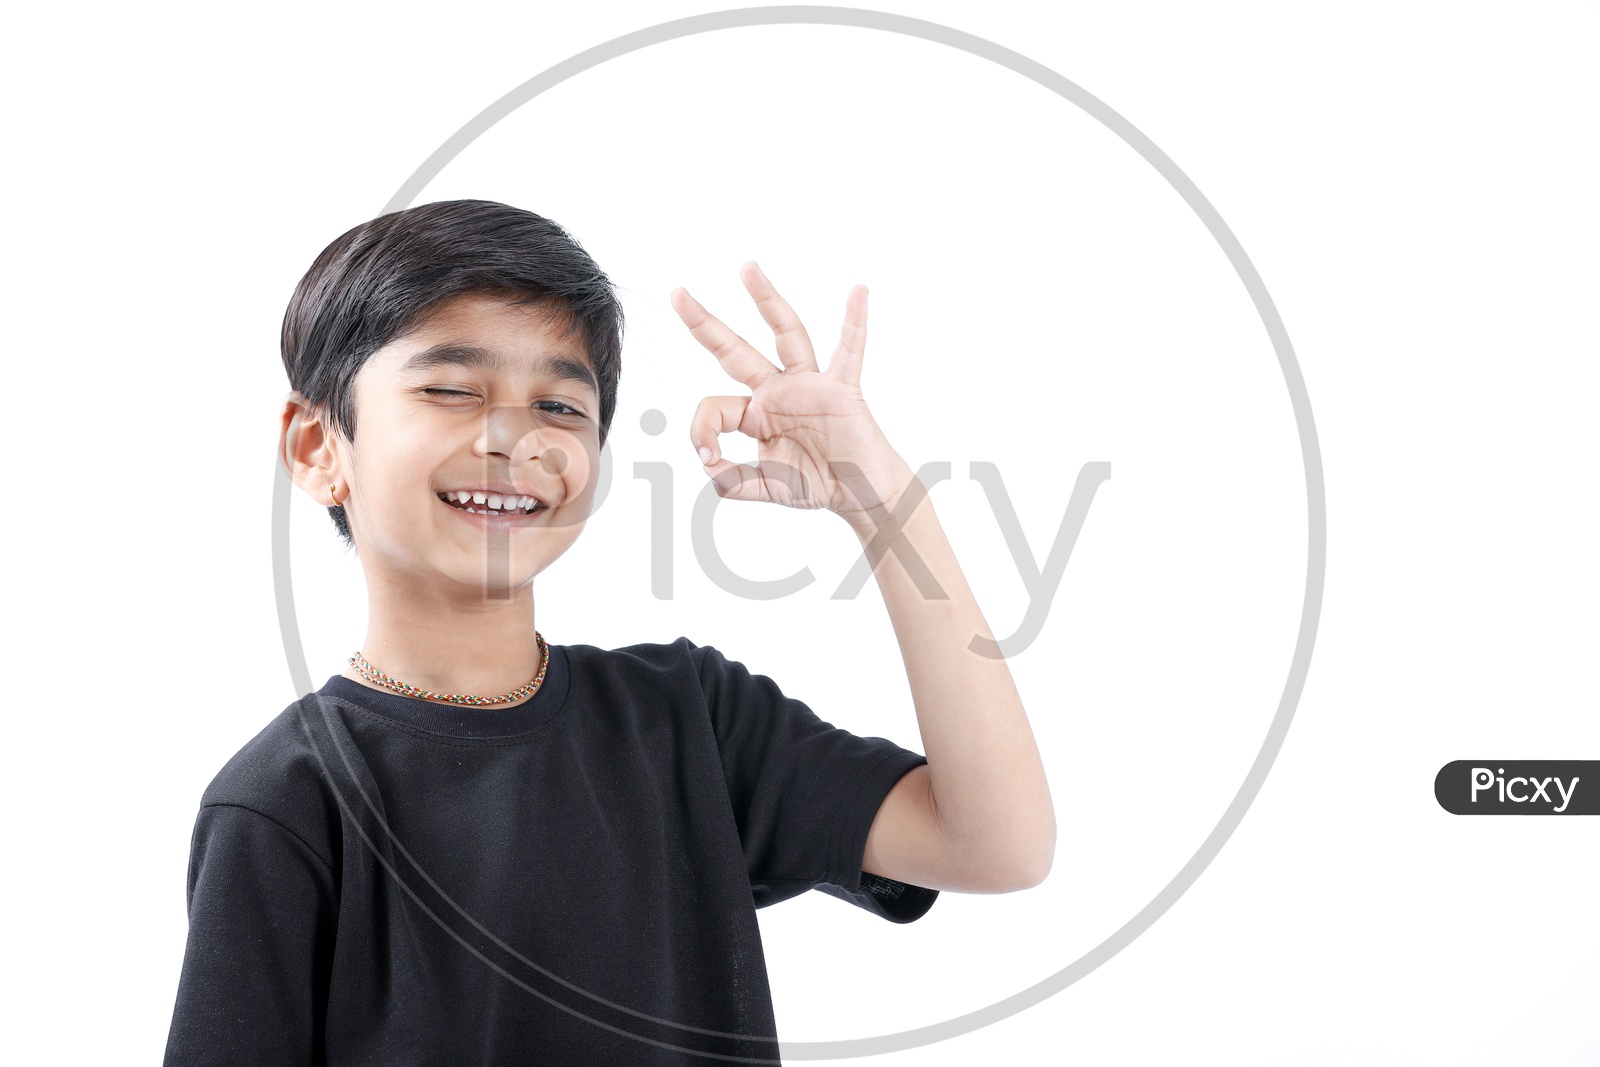 Indian Cute Little Boy Or Asian Kid   With Expressions On Face On an Isolated White Background